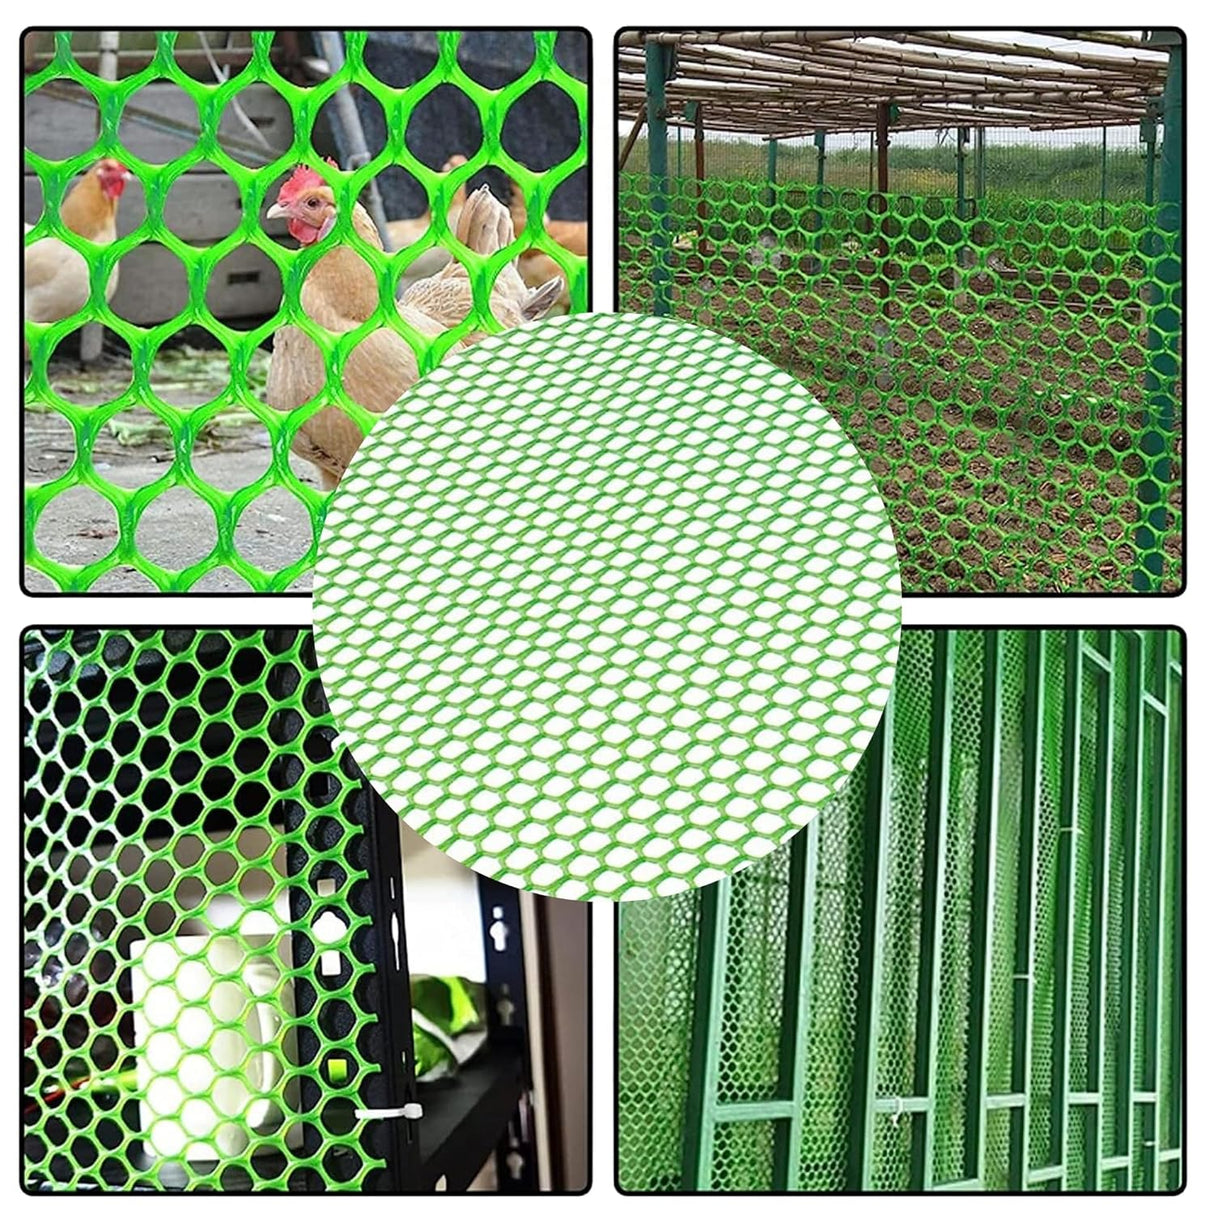 Singhal Tree Guard Net, Garden Fencing Net Virgin Plastic with 1 Cutter and 50 PVC Tags (Green, 4 ft x 10 ft)